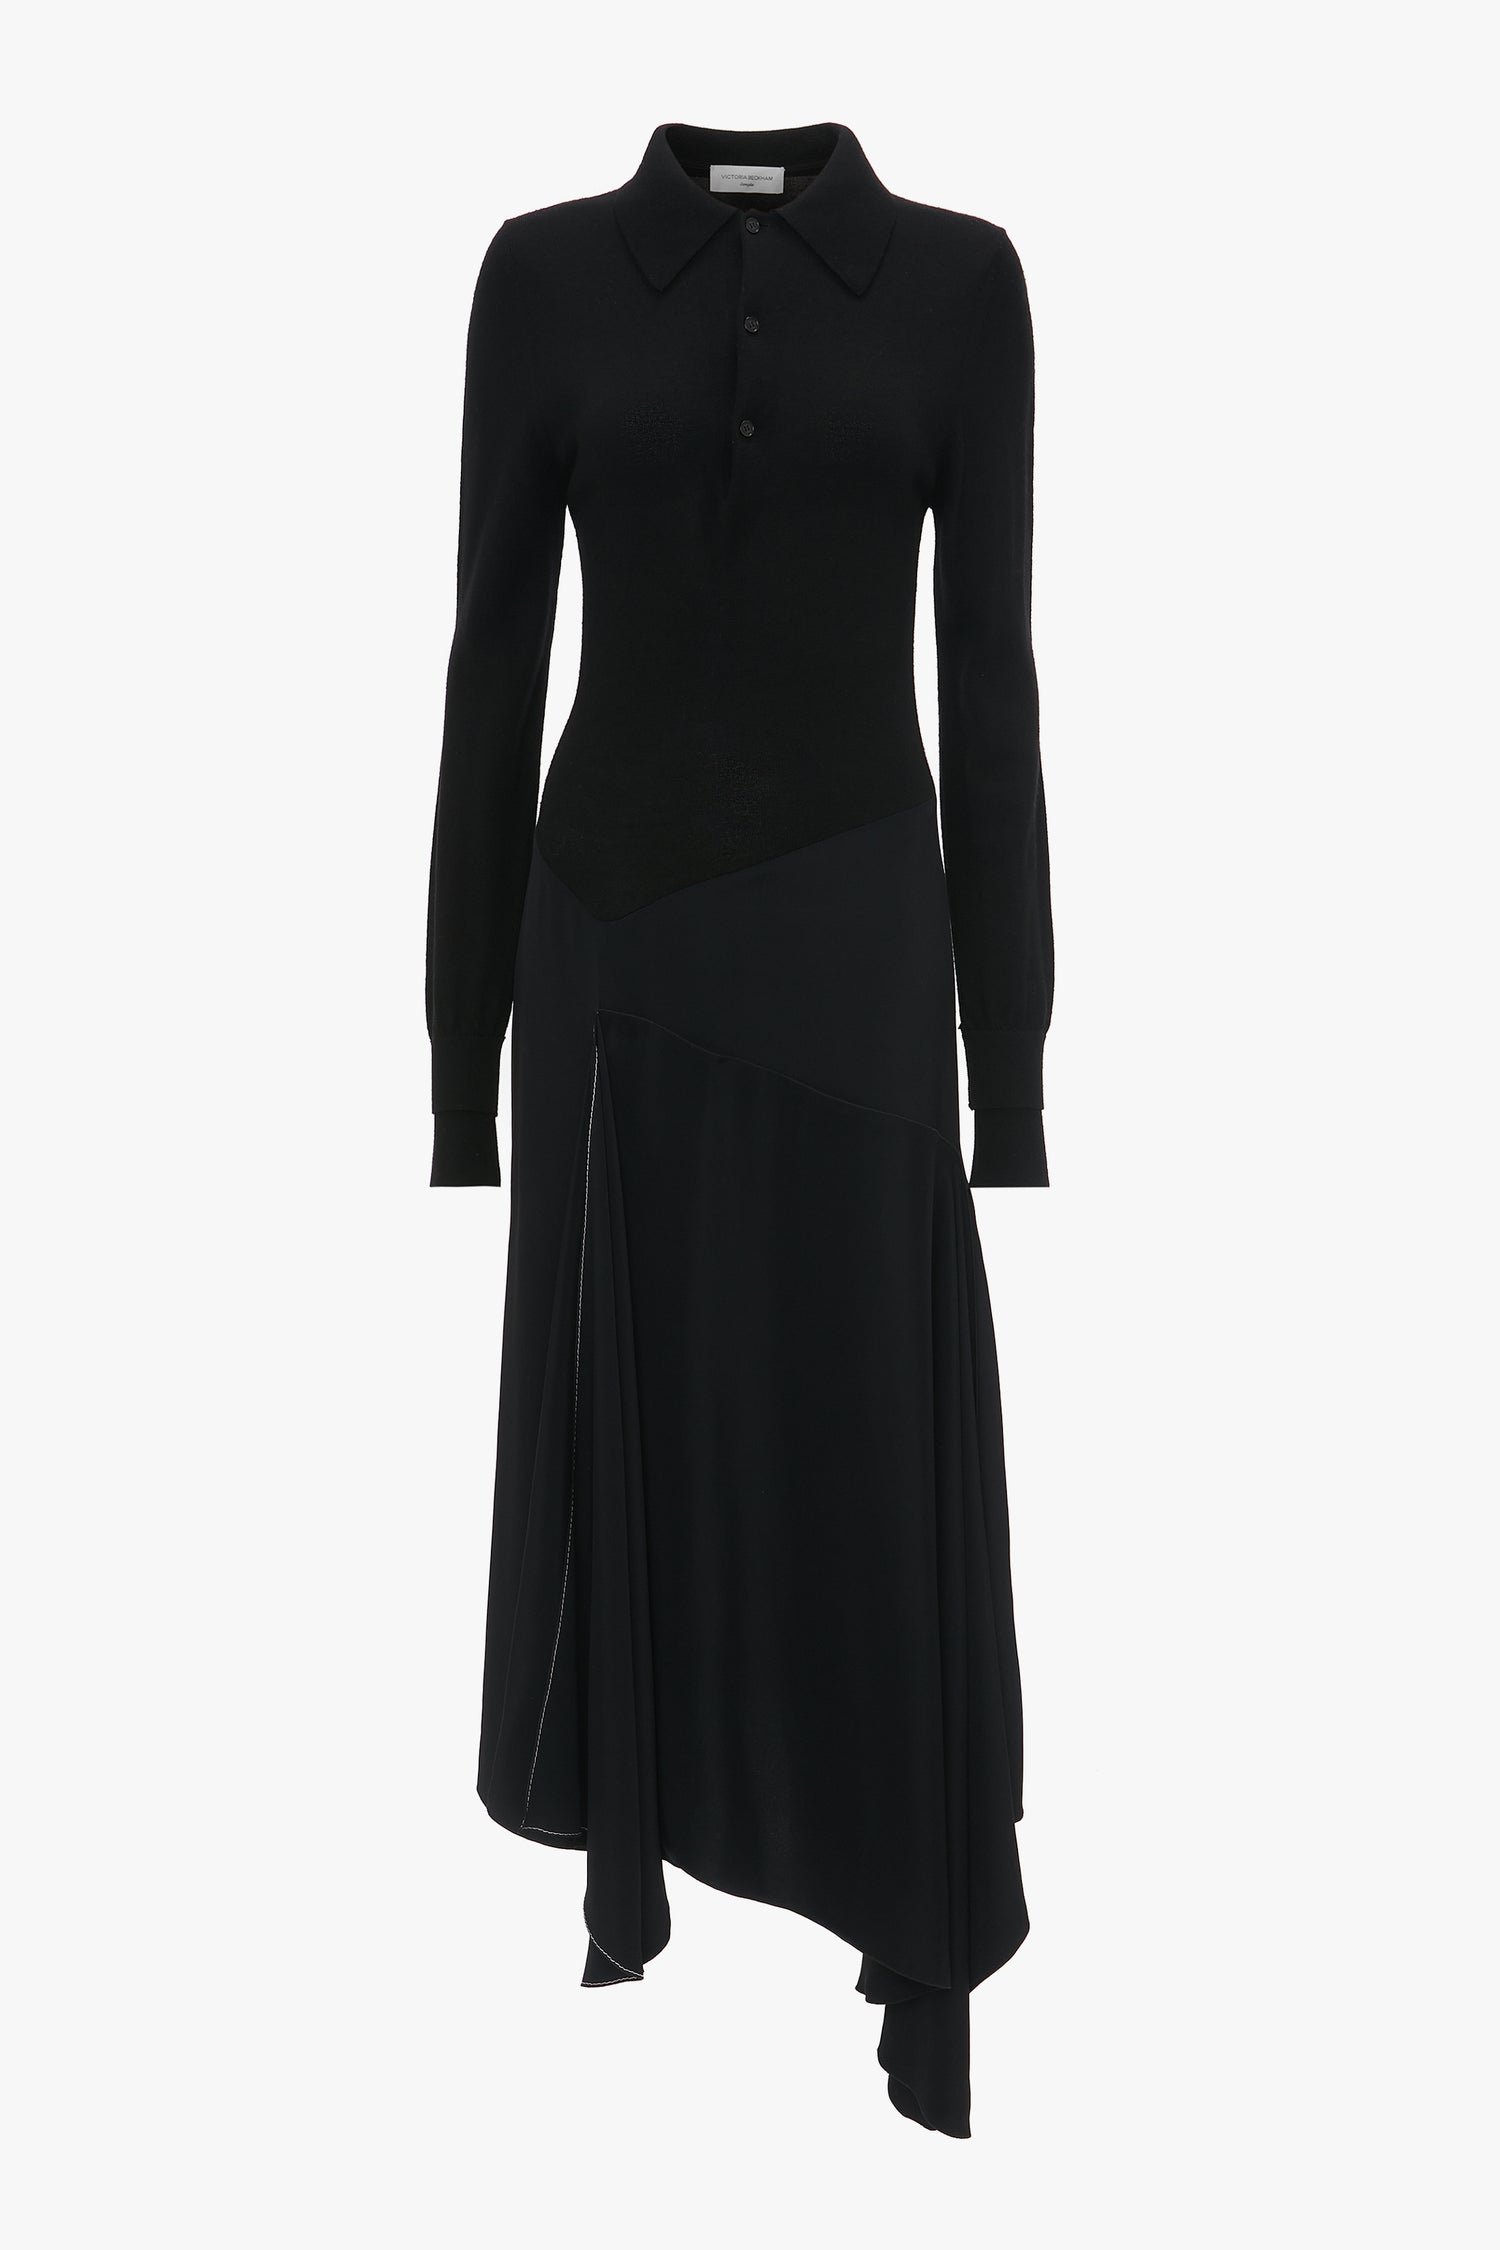 A long-sleeve Henley Shirt Dress In Black with a collared neckline and asymmetrical hem. The dress, made from luxurious merino wool knit, features button details on the upper section and an elegant asymmetric waist seam. This piece is by Victoria Beckham.